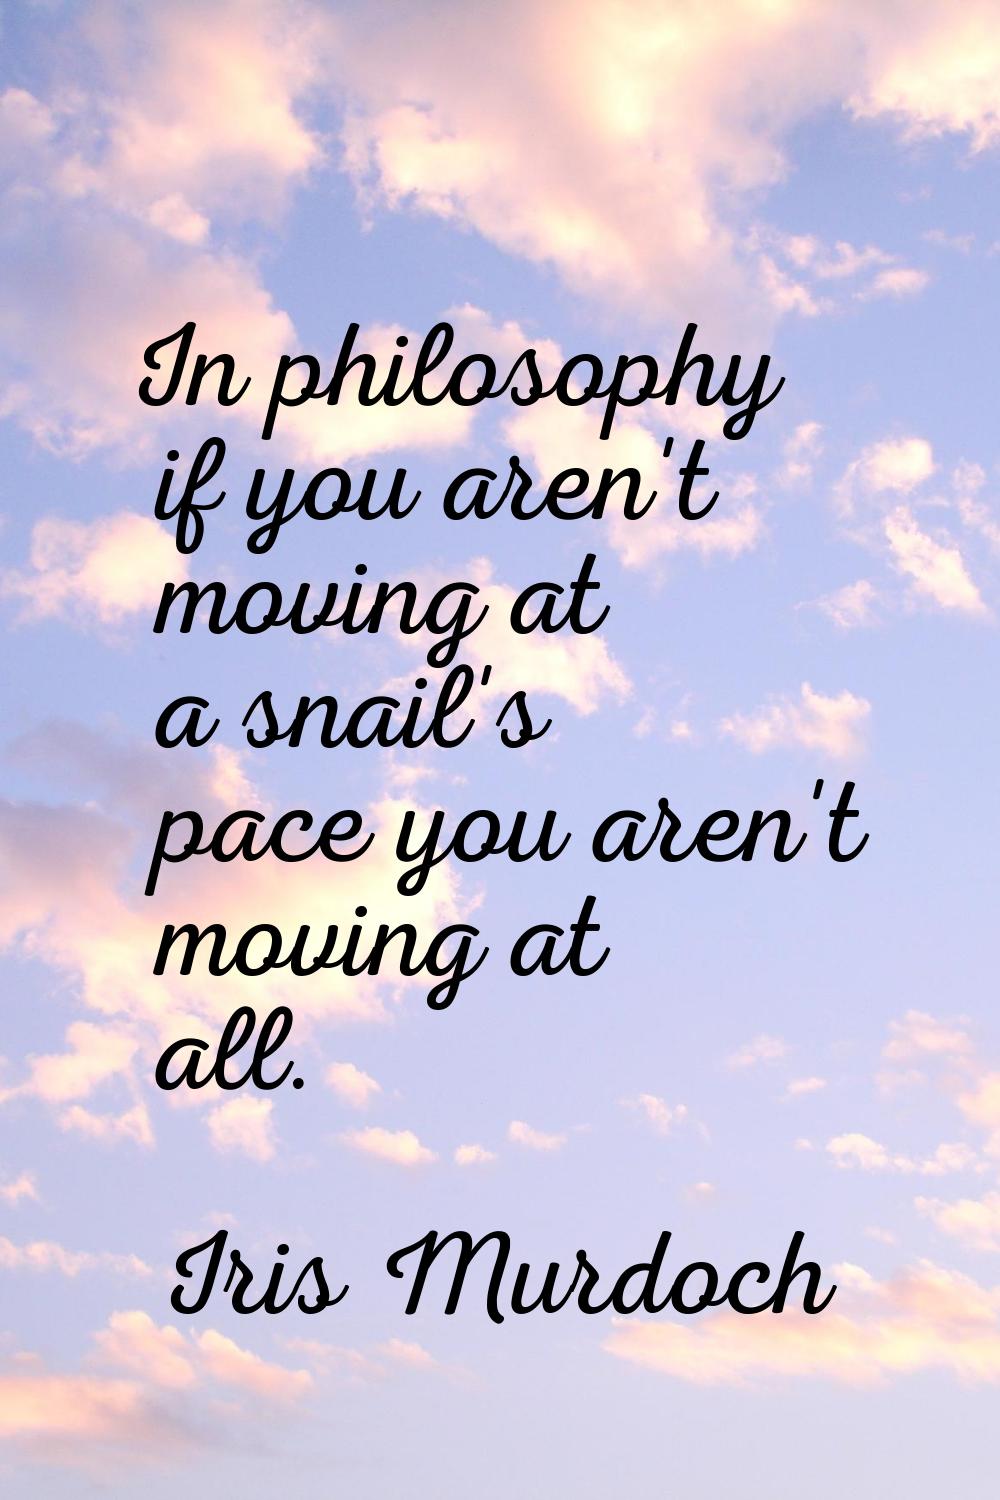 In philosophy if you aren't moving at a snail's pace you aren't moving at all.